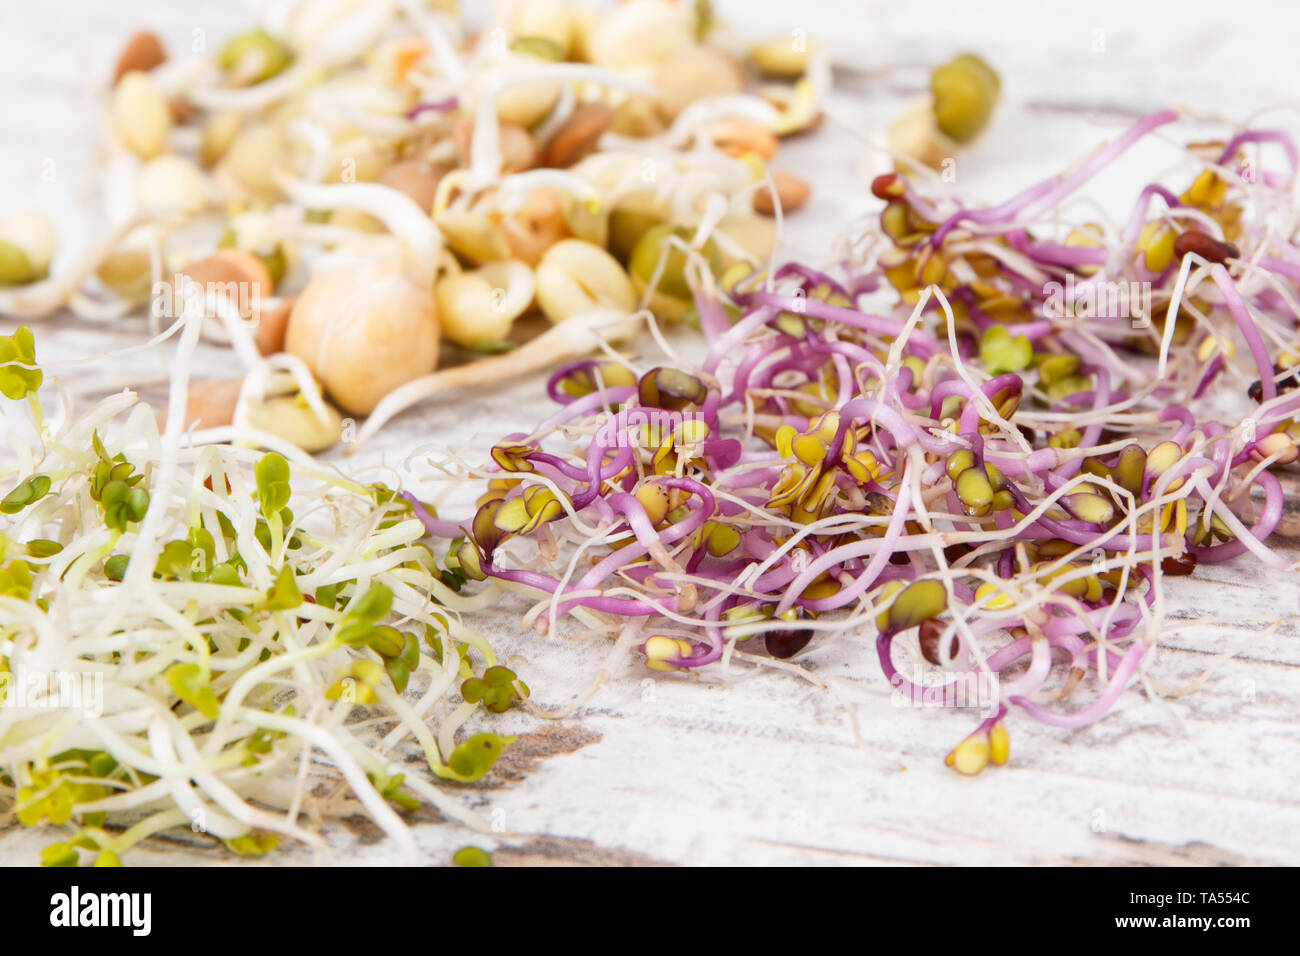 Different types of healthy sprouts containing natural vitamins and minerals Stock Photo